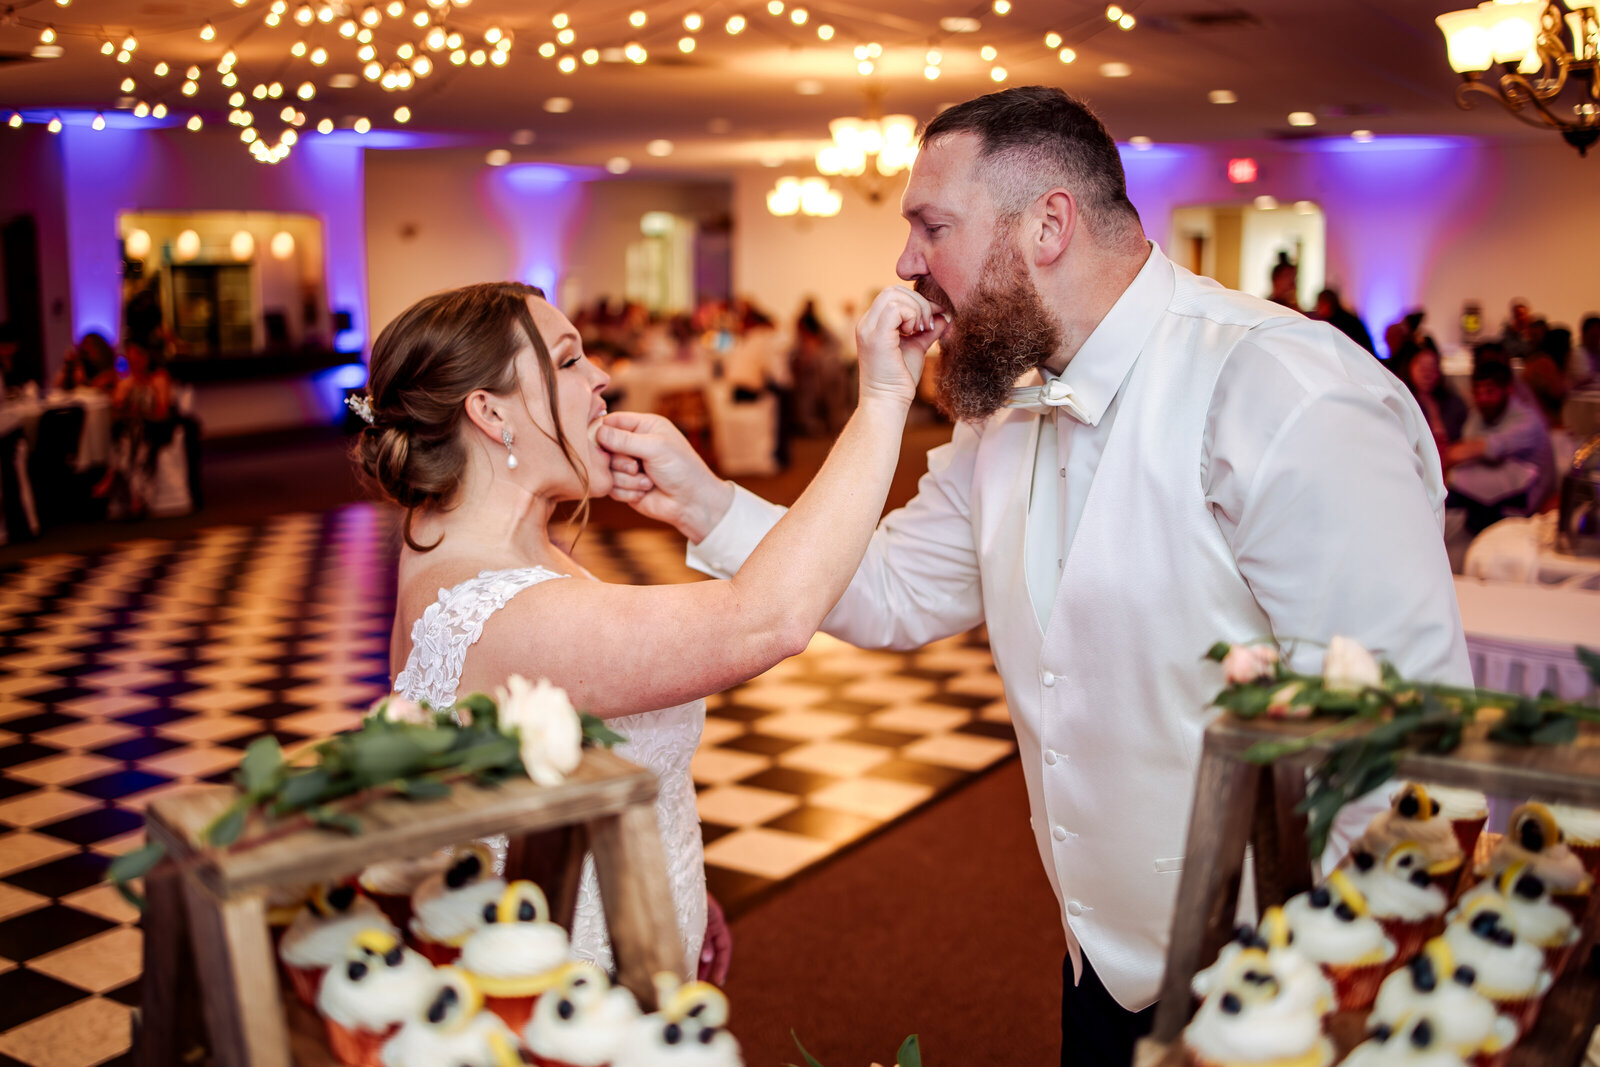 Bride and groom feed eachother a piecce of cake at their wedding reception